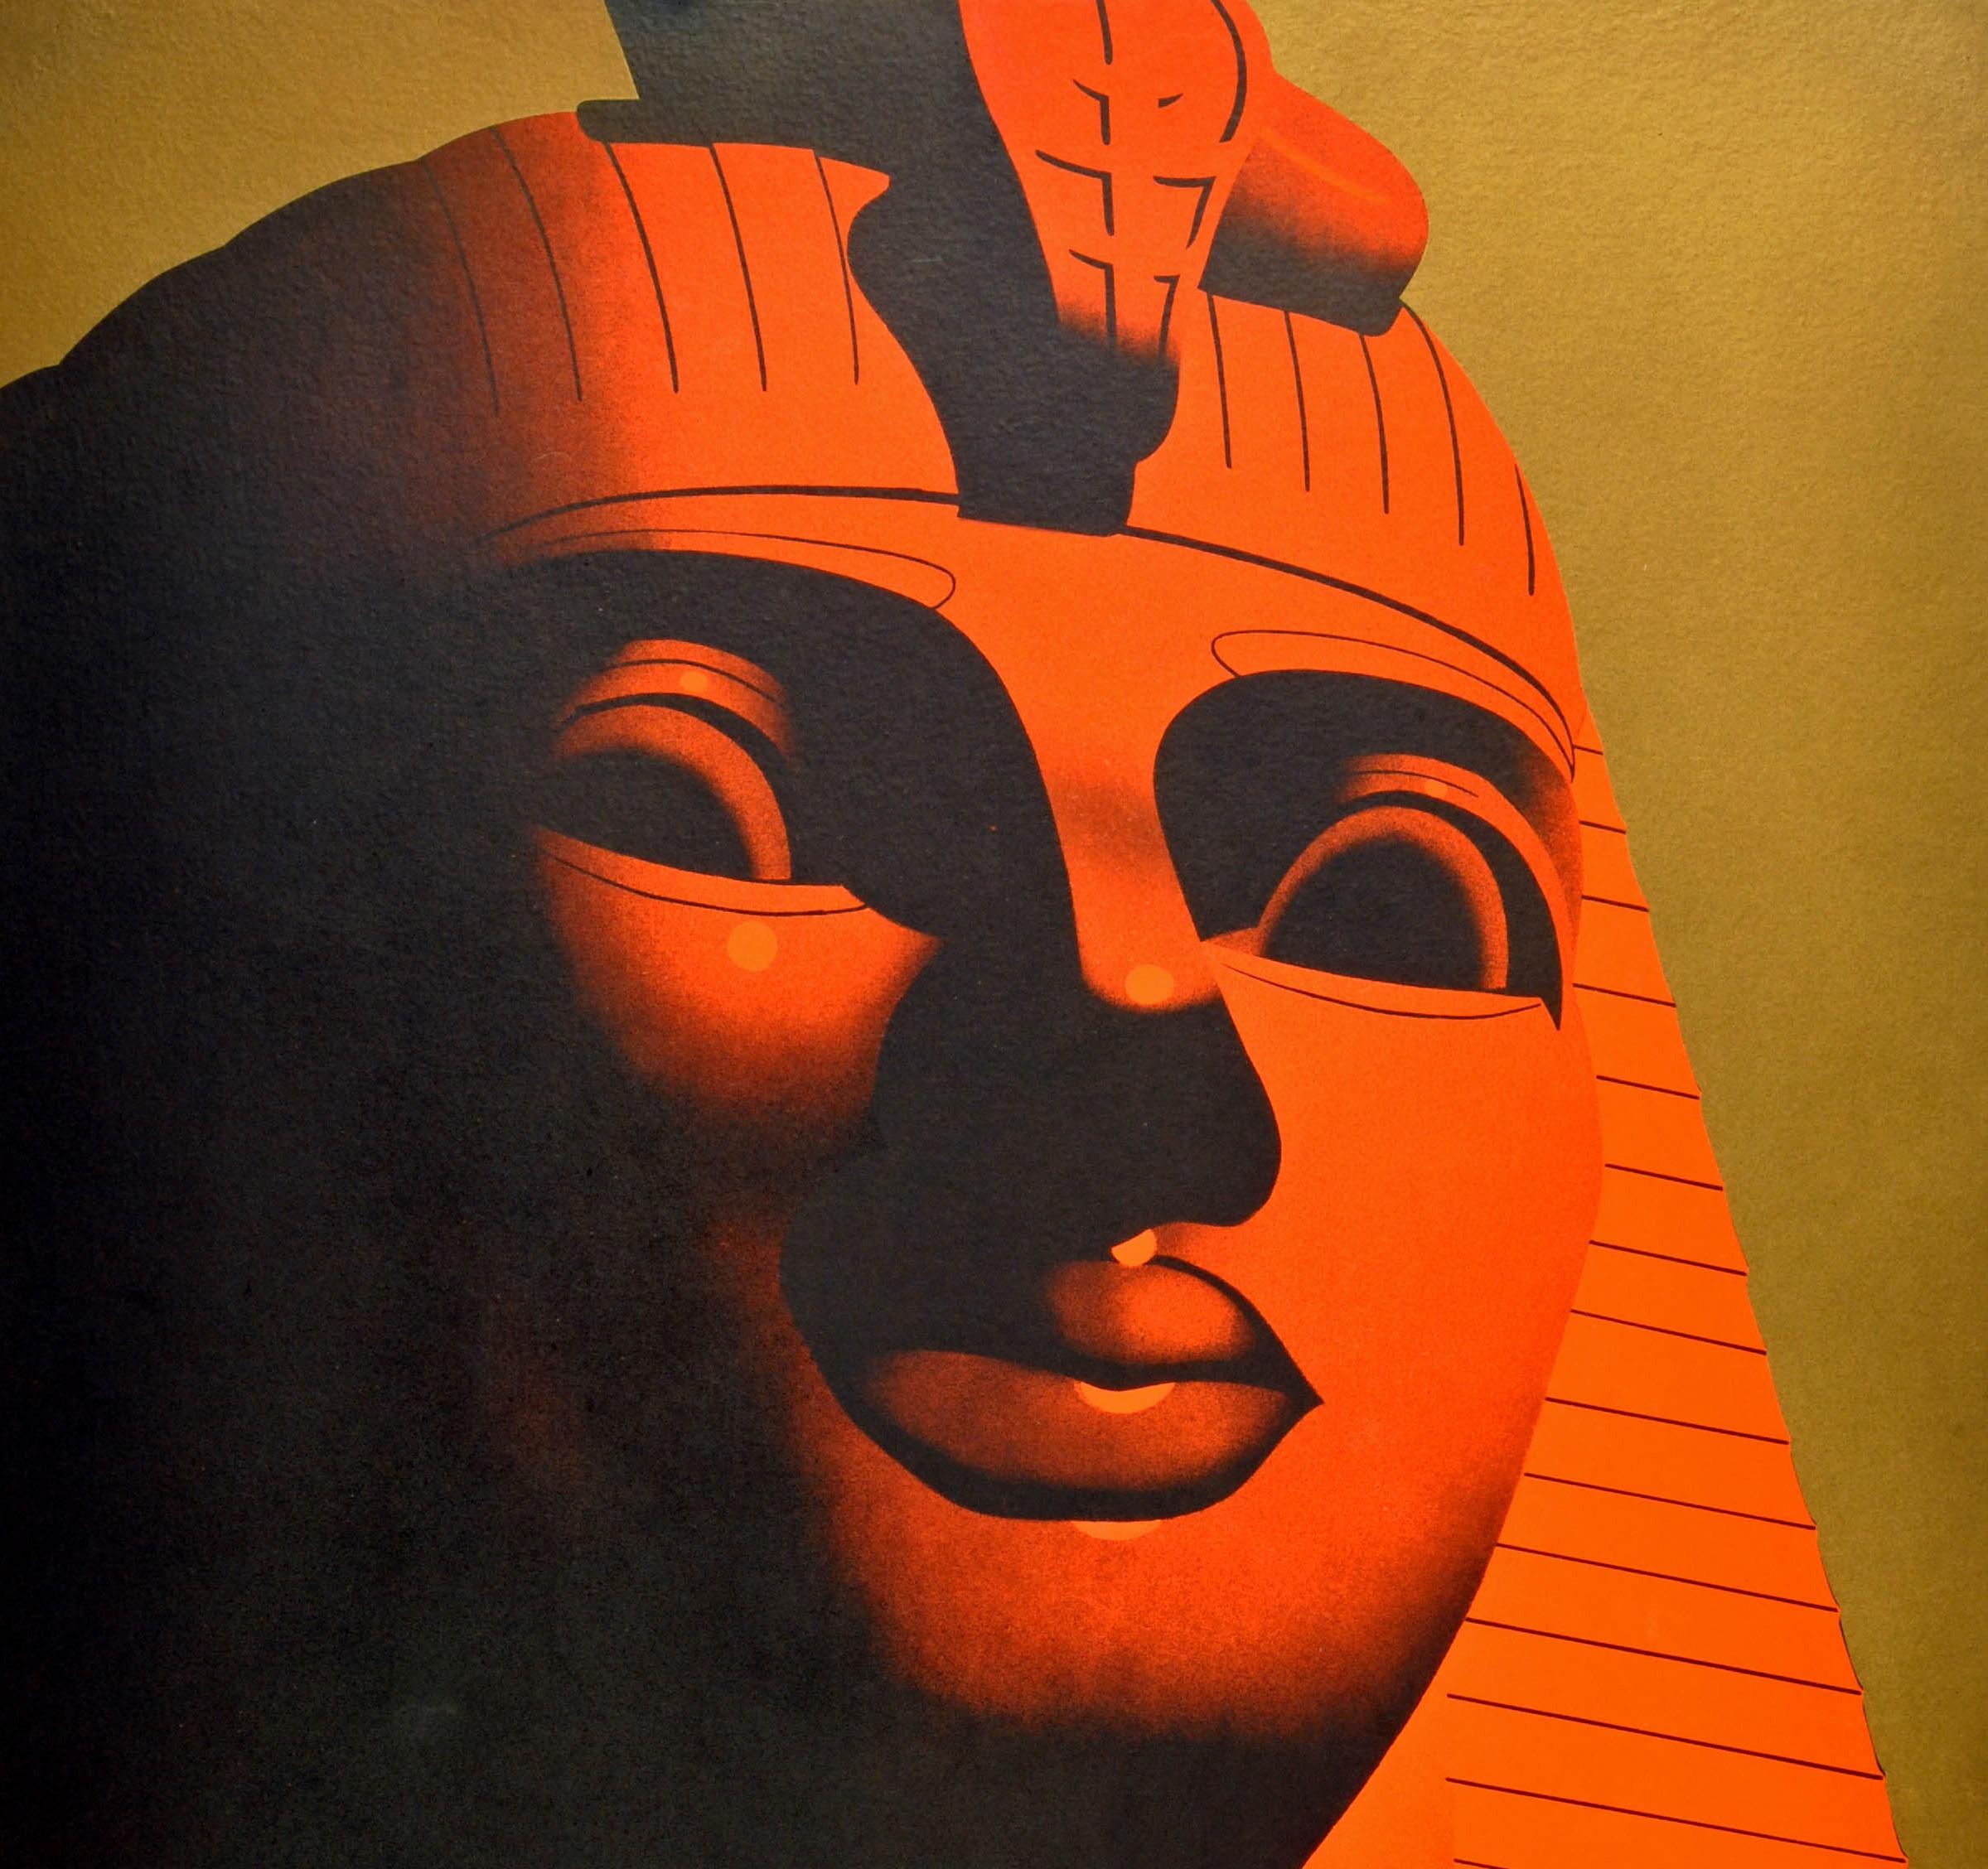 Original lithograph vintage travel poster printed for the Egyptian Government Tourist State Dept. (North Africa). Egypt for Winter Sunshine. Great Art Deco image of the Great Sphinx of Giza in bold colours, red and black on a gold background. Very